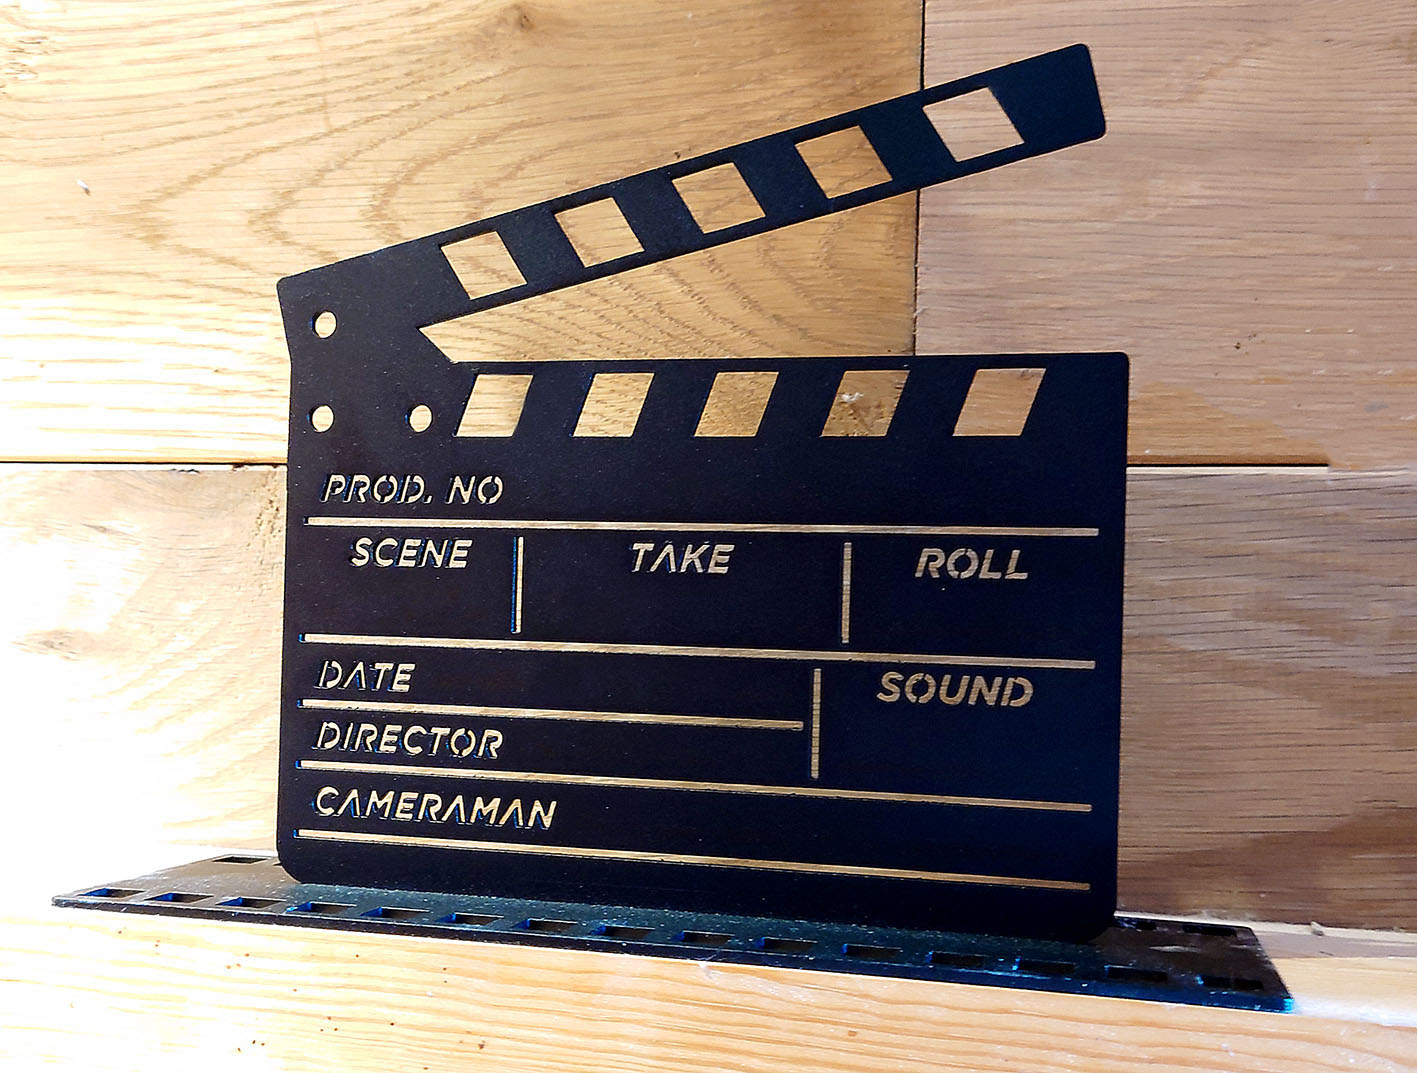 Clapper Board Ornament from At the Movies collection - made from steel with a black finish, posed on a wooden surface with a wooden wall.